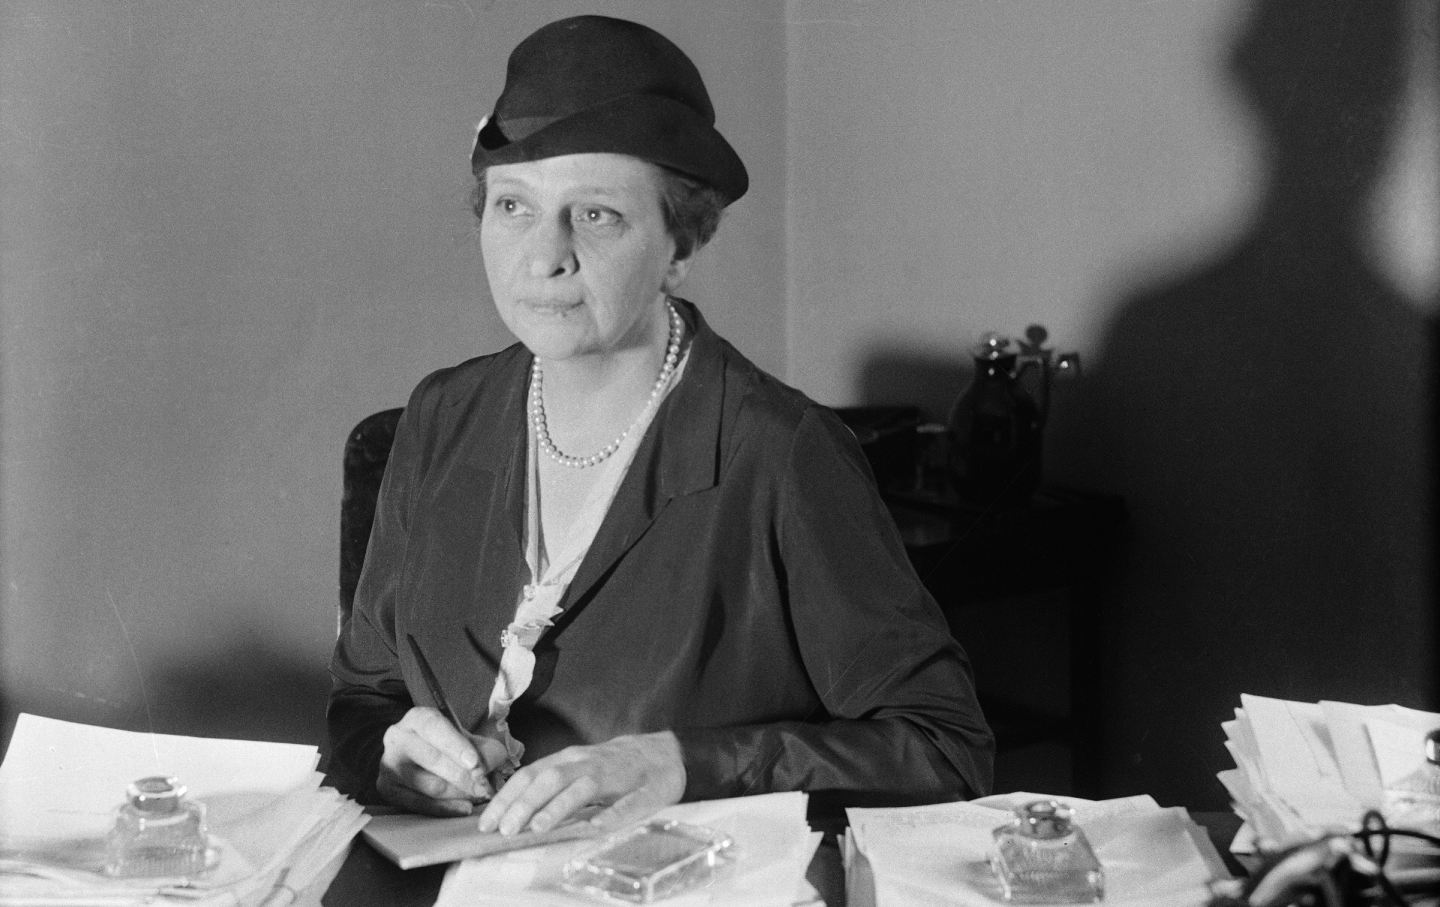 Frances Perkins in 1933, just before becoming secretary of labor for Franklin D. Roosevelt.